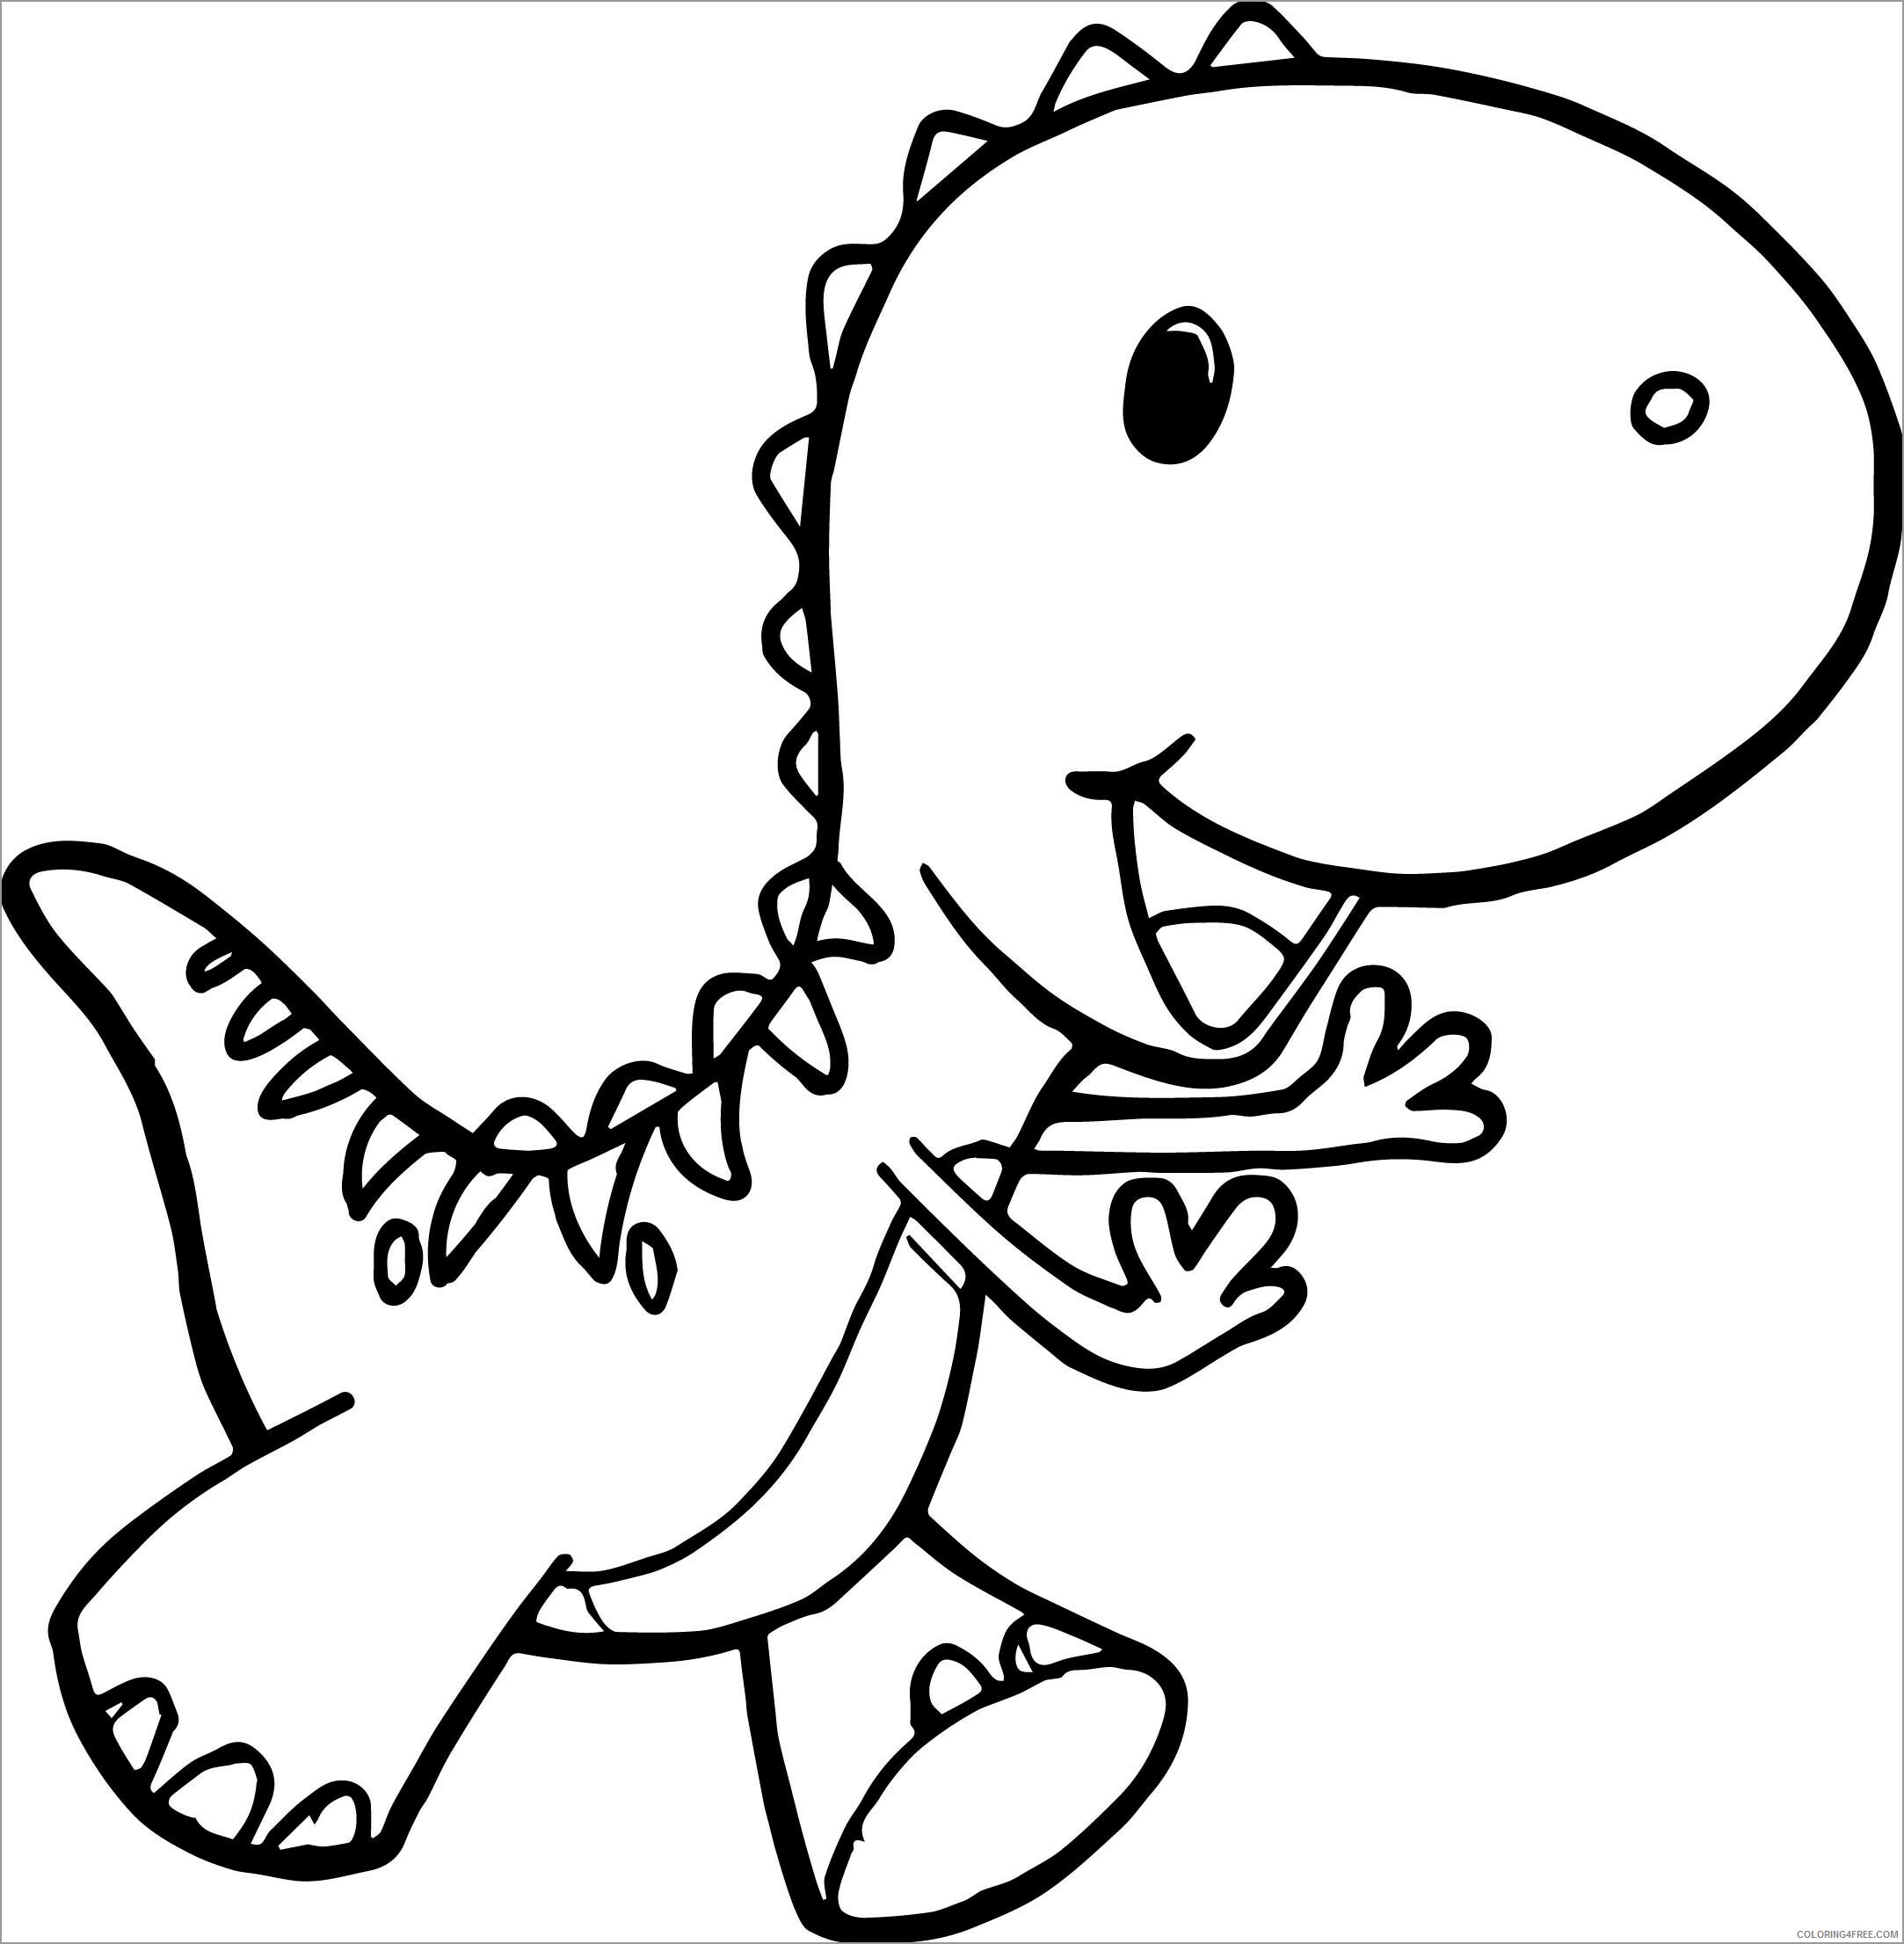 Dinosaurs Coloring Pages for boys baby dinosaur Printable 2020 0244 Coloring4free